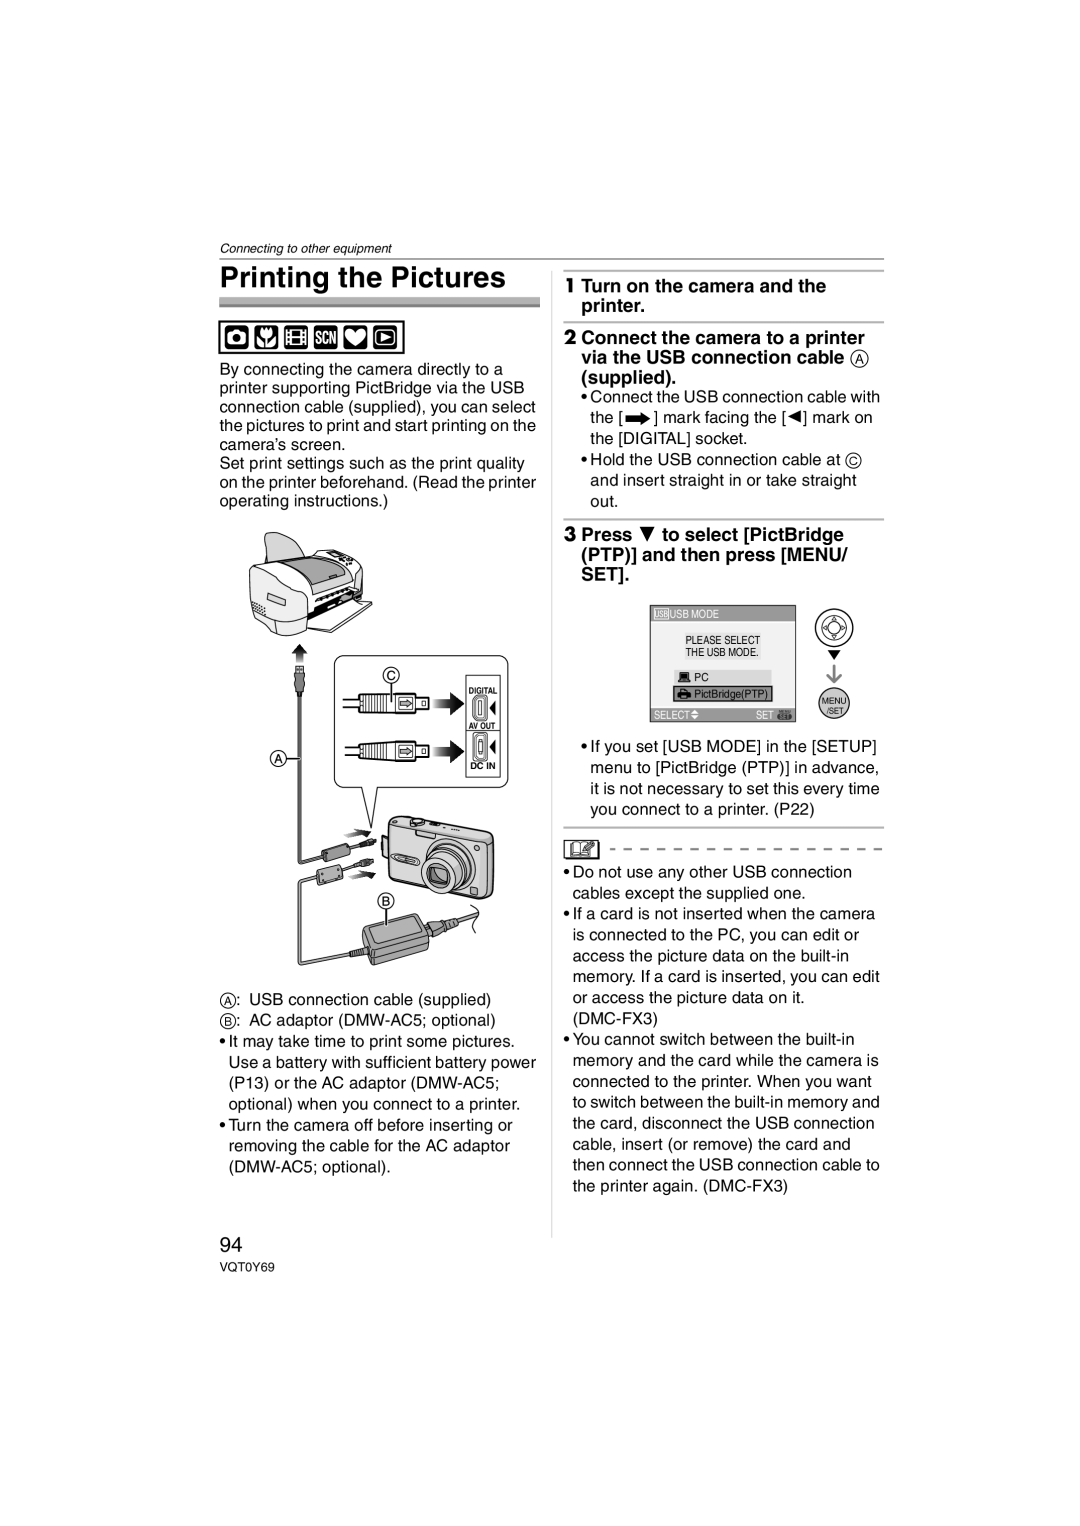 Panasonic DMC-FX07, DMC-FX3 operating instructions Printing the Pictures, Turn on the camera and the printer 